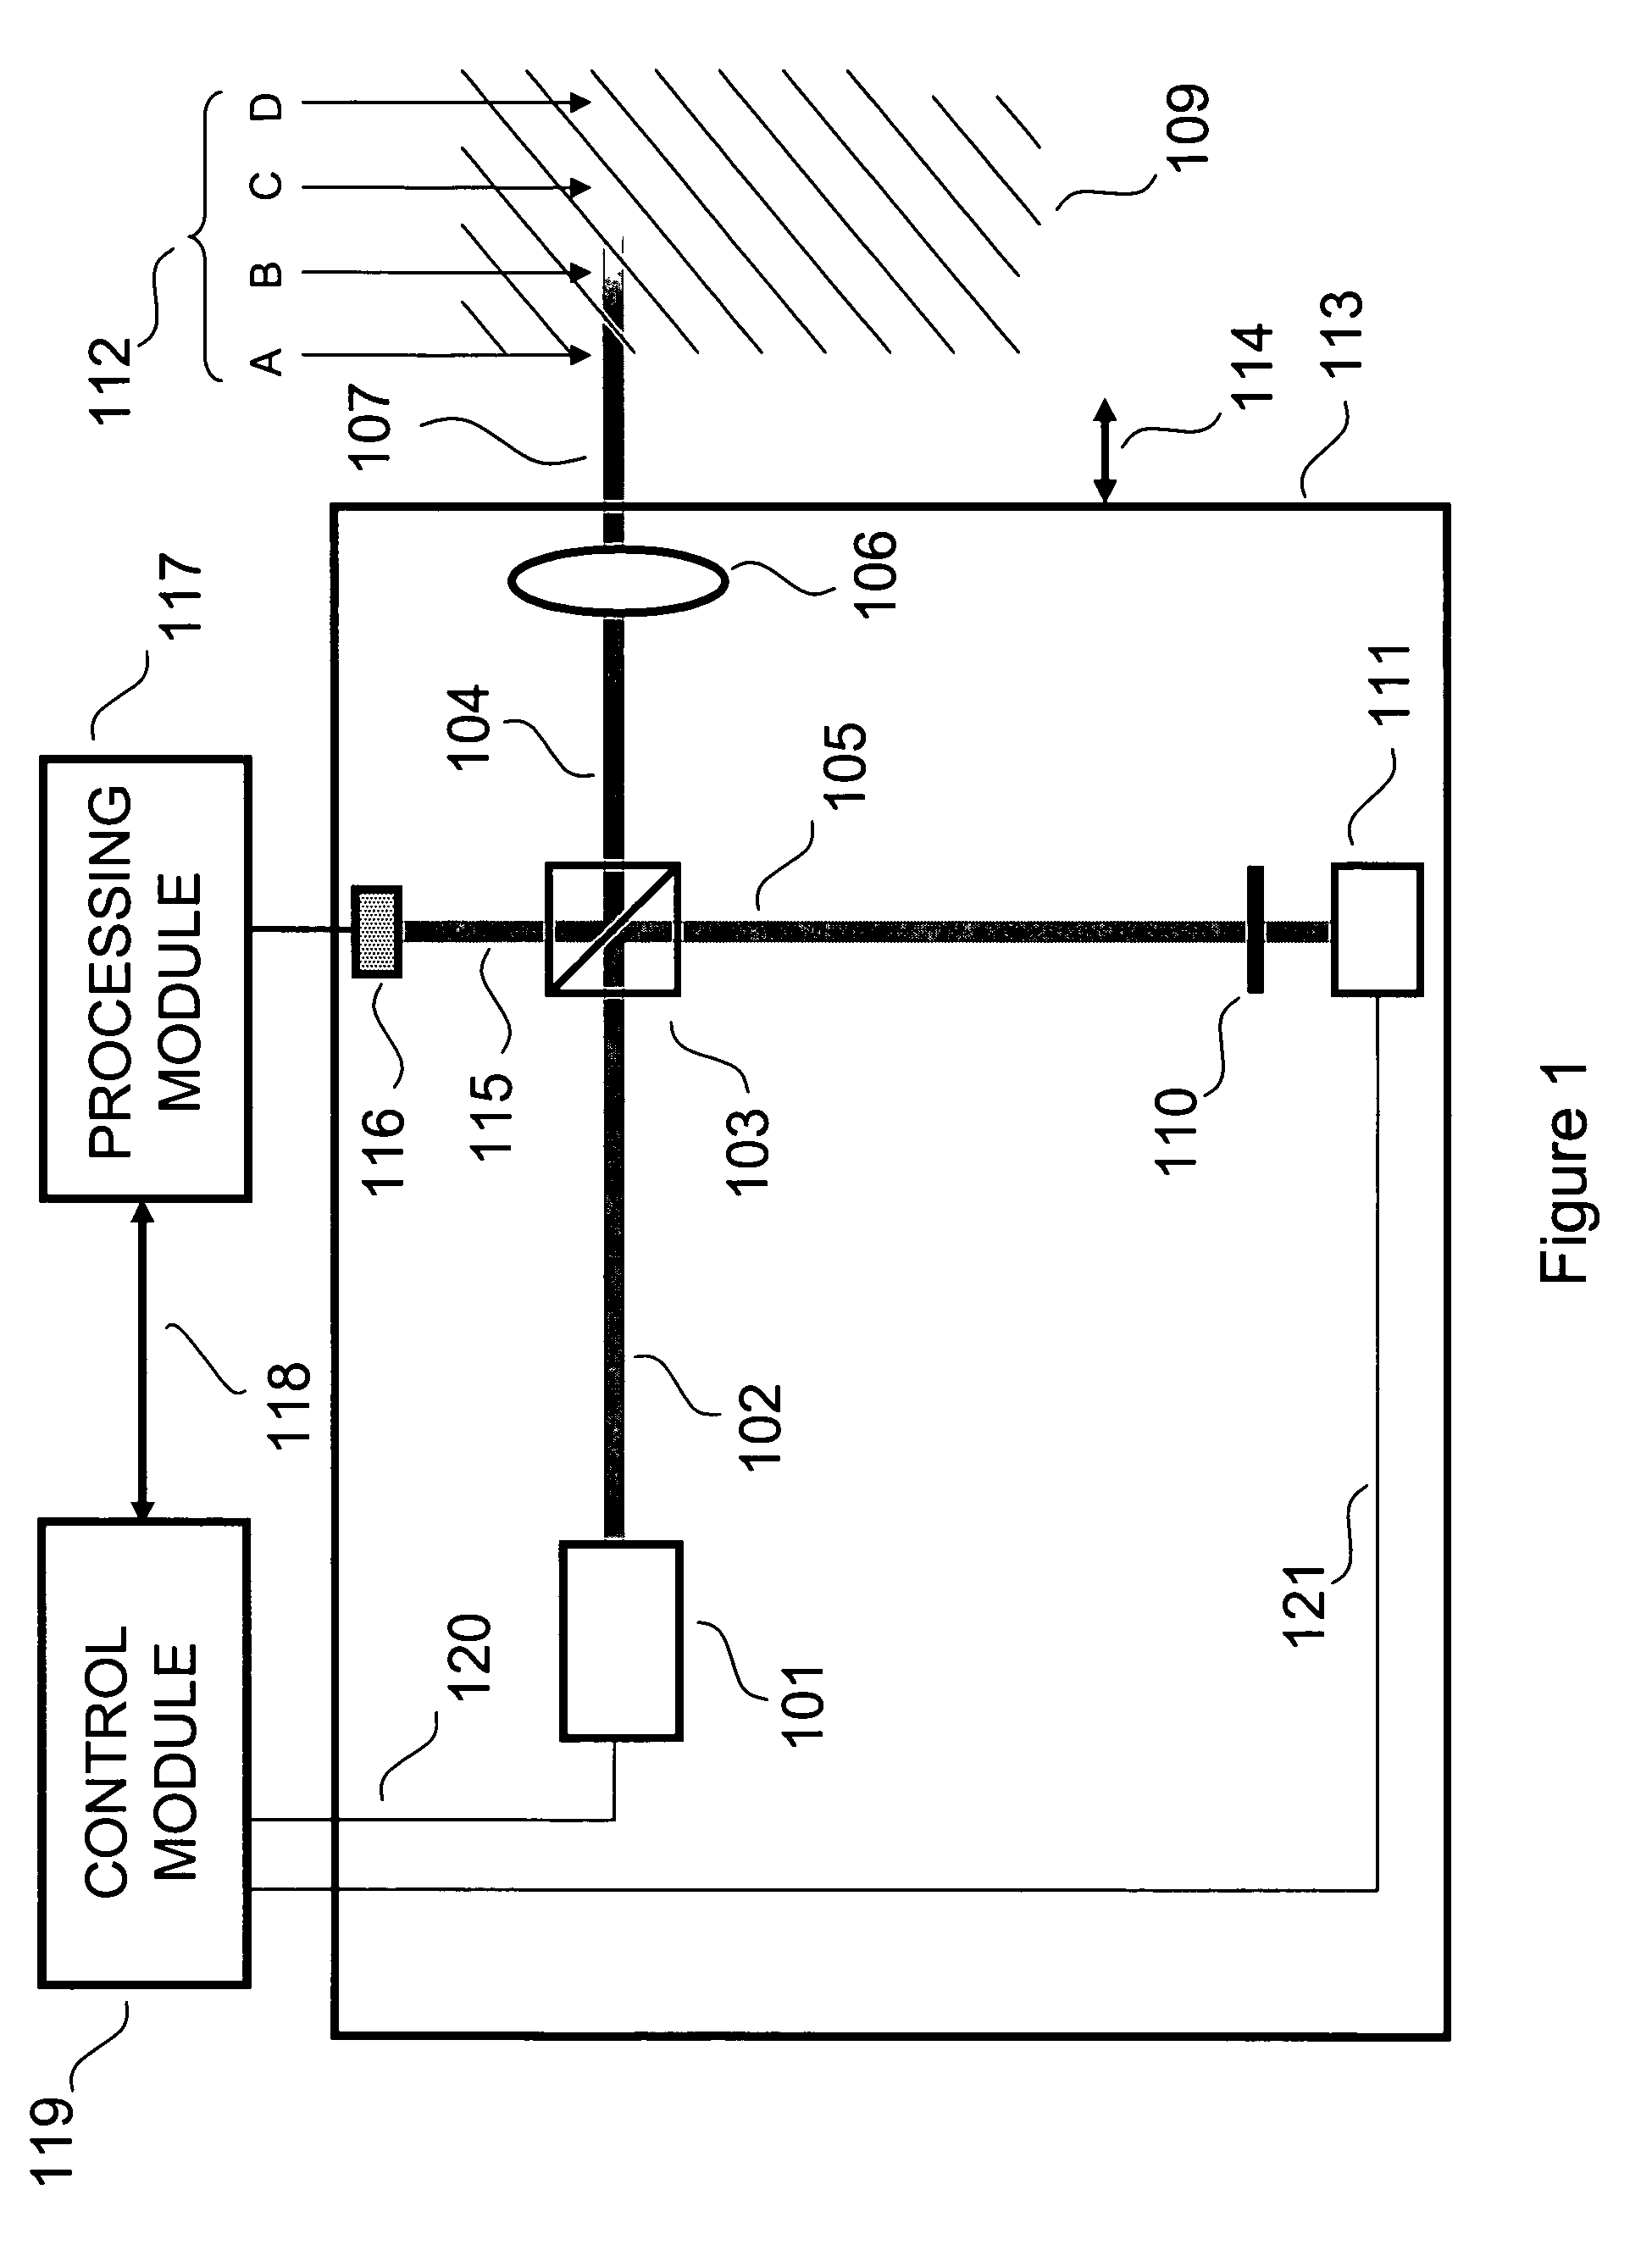 Frequency resolved imaging system